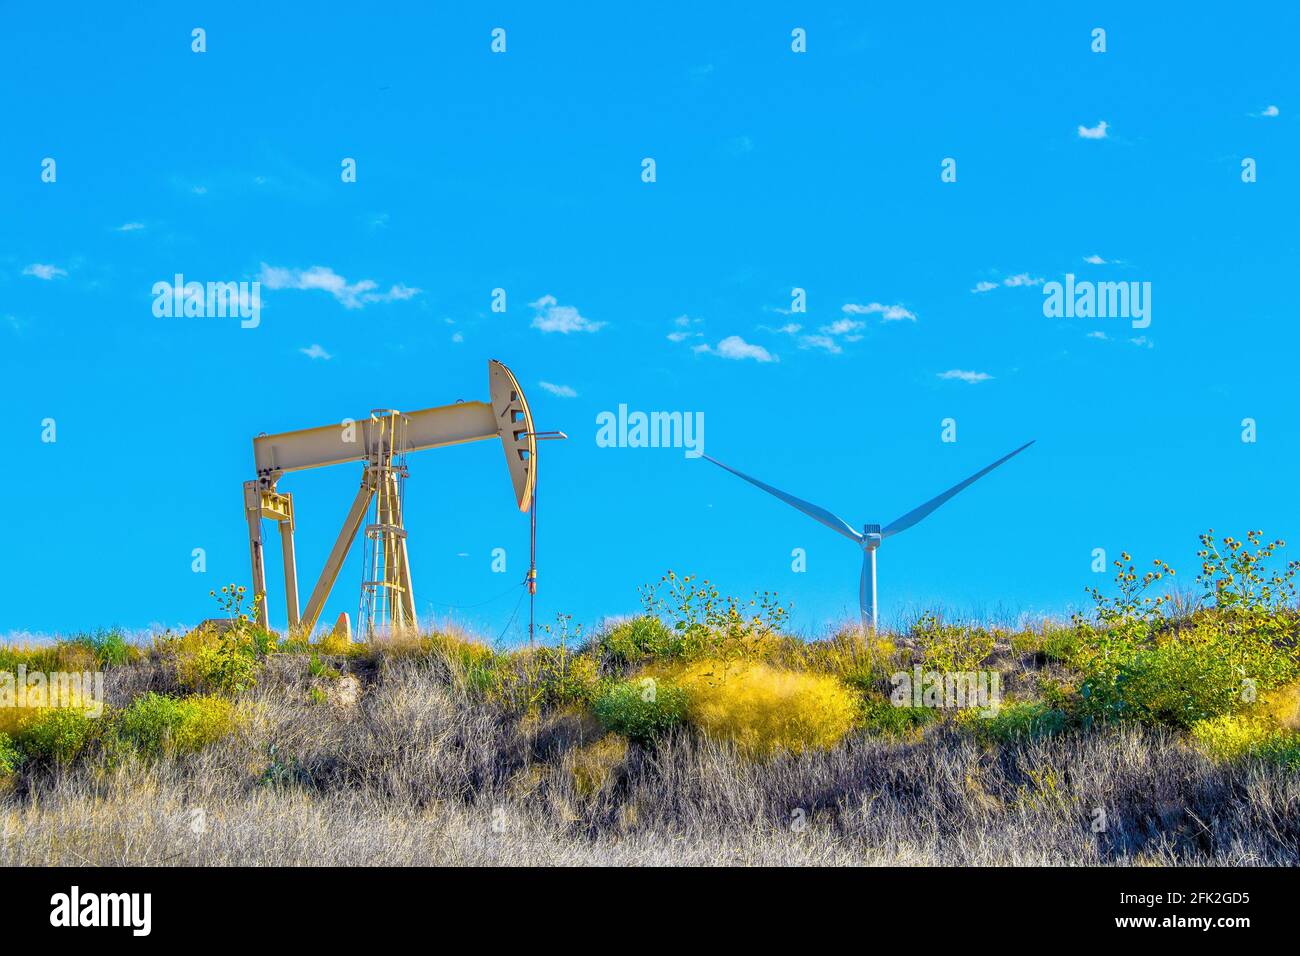 Yellow oil well pump jack sitting on ridge with colorful flowers and folliage with giant industrial windmill peeping over the horizon against beautifu Stock Photo